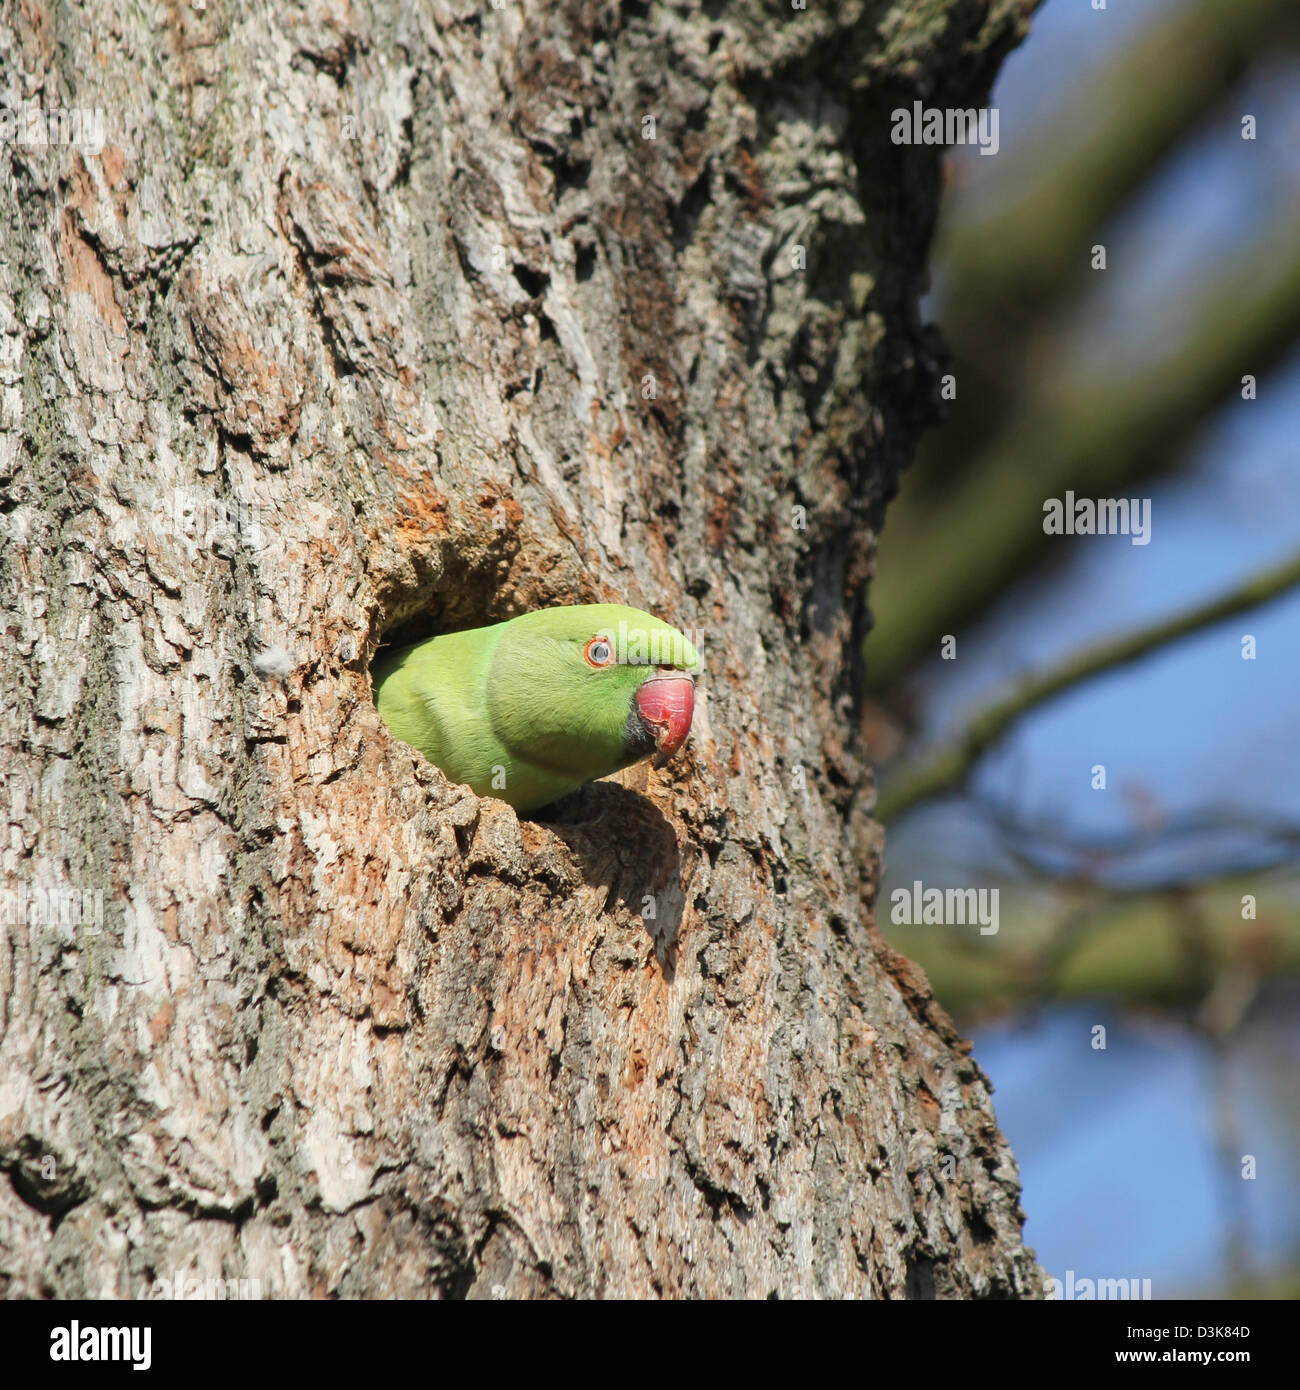 Richmond Park, London, England. Rose-ringed parakeet emerging from hole in tree. Stock Photo